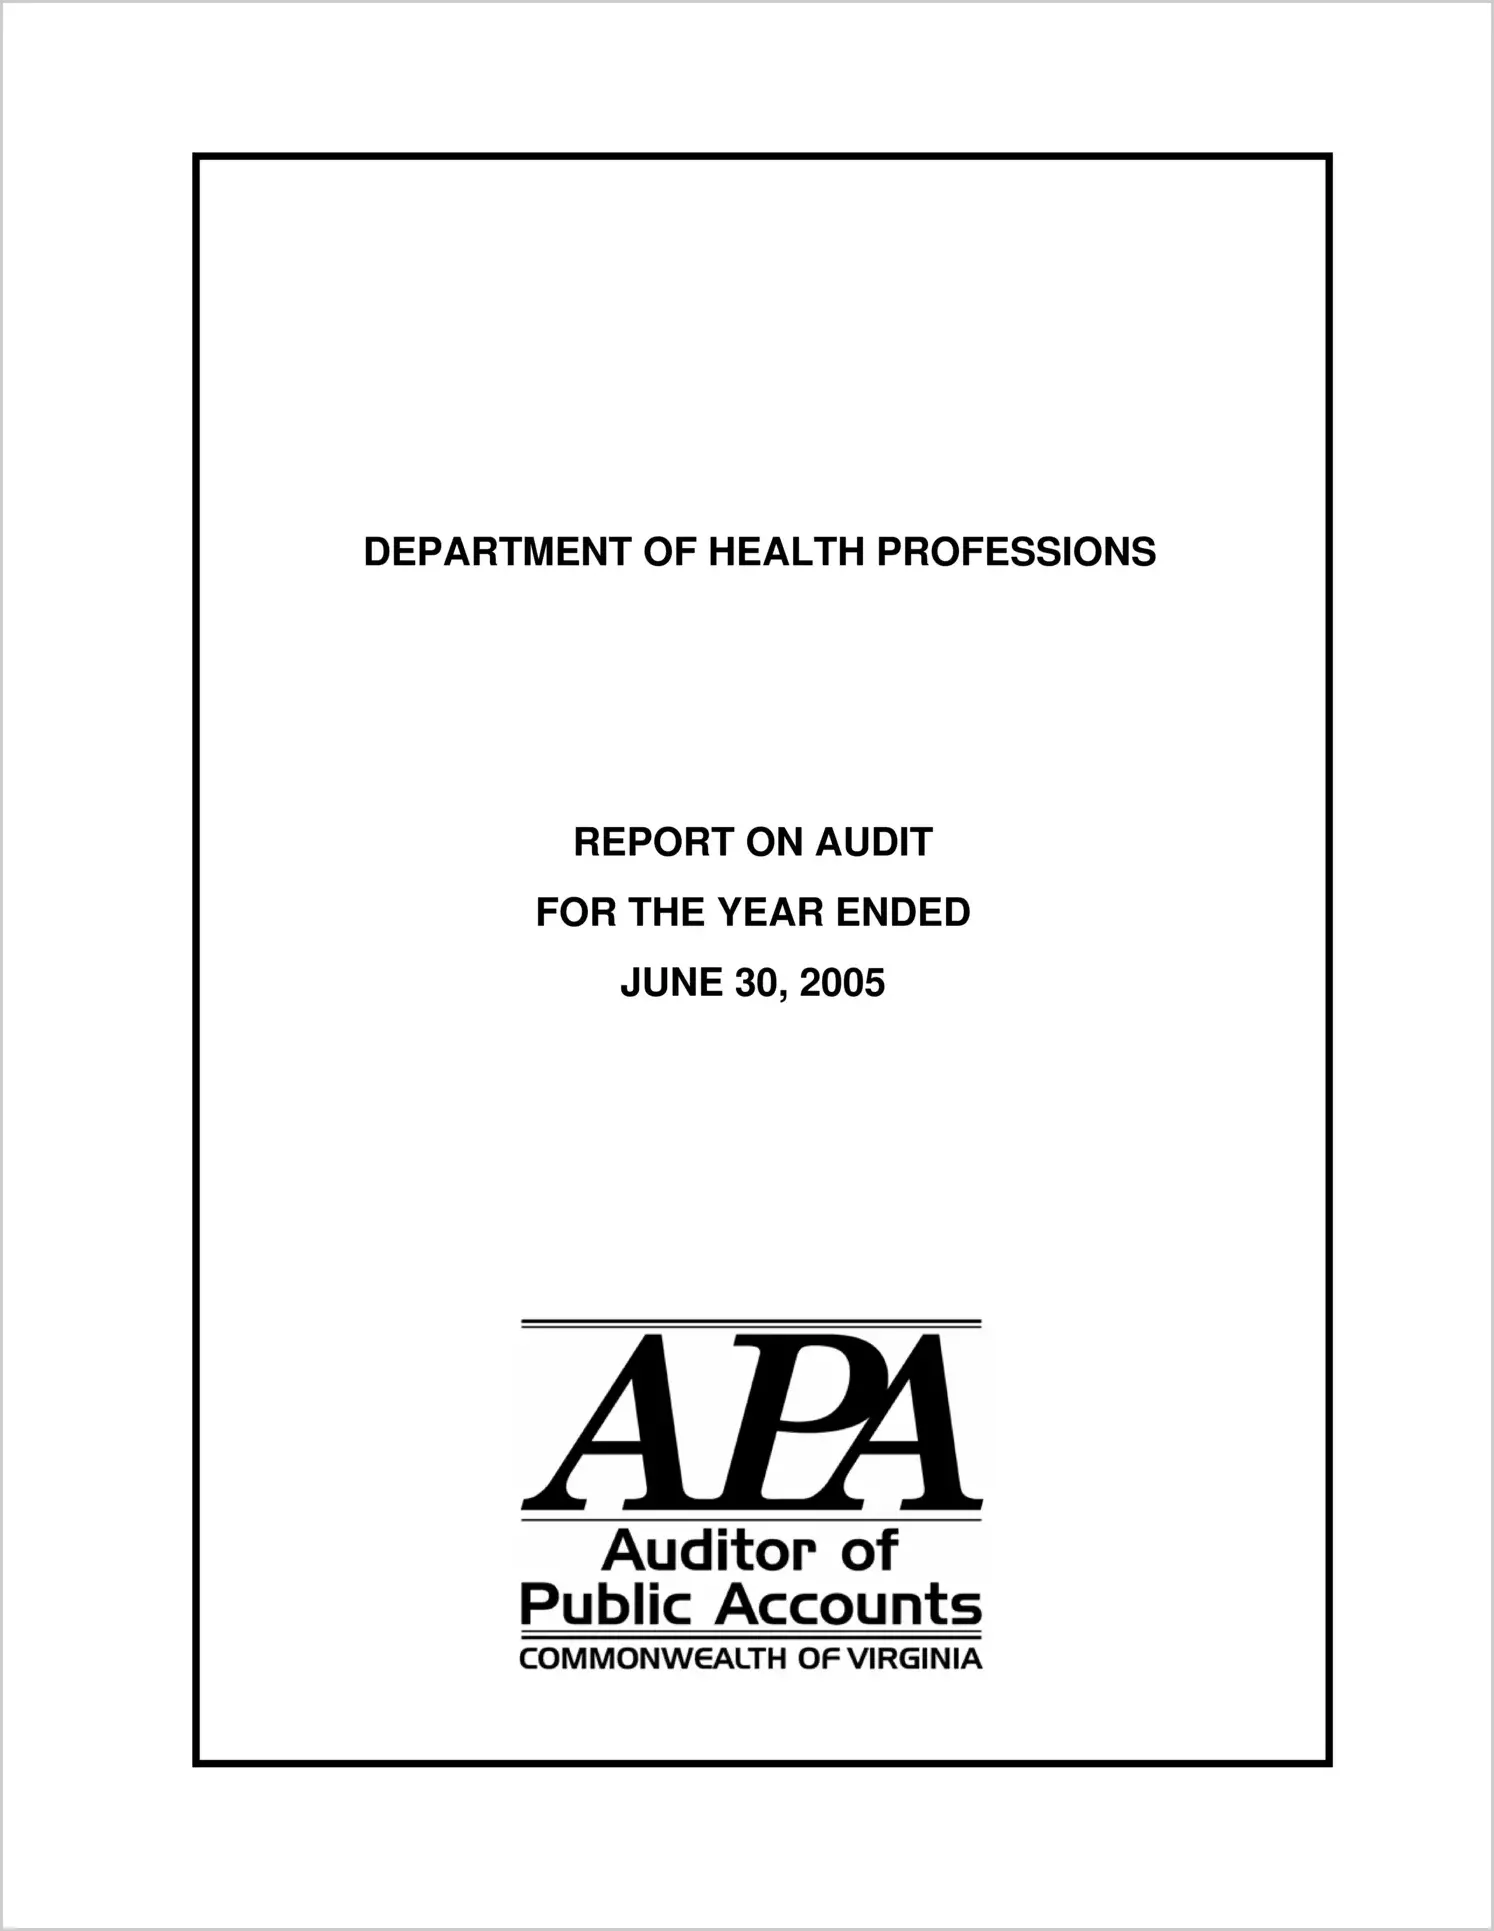 Department of Health Professions for the year ended June 30, 2005